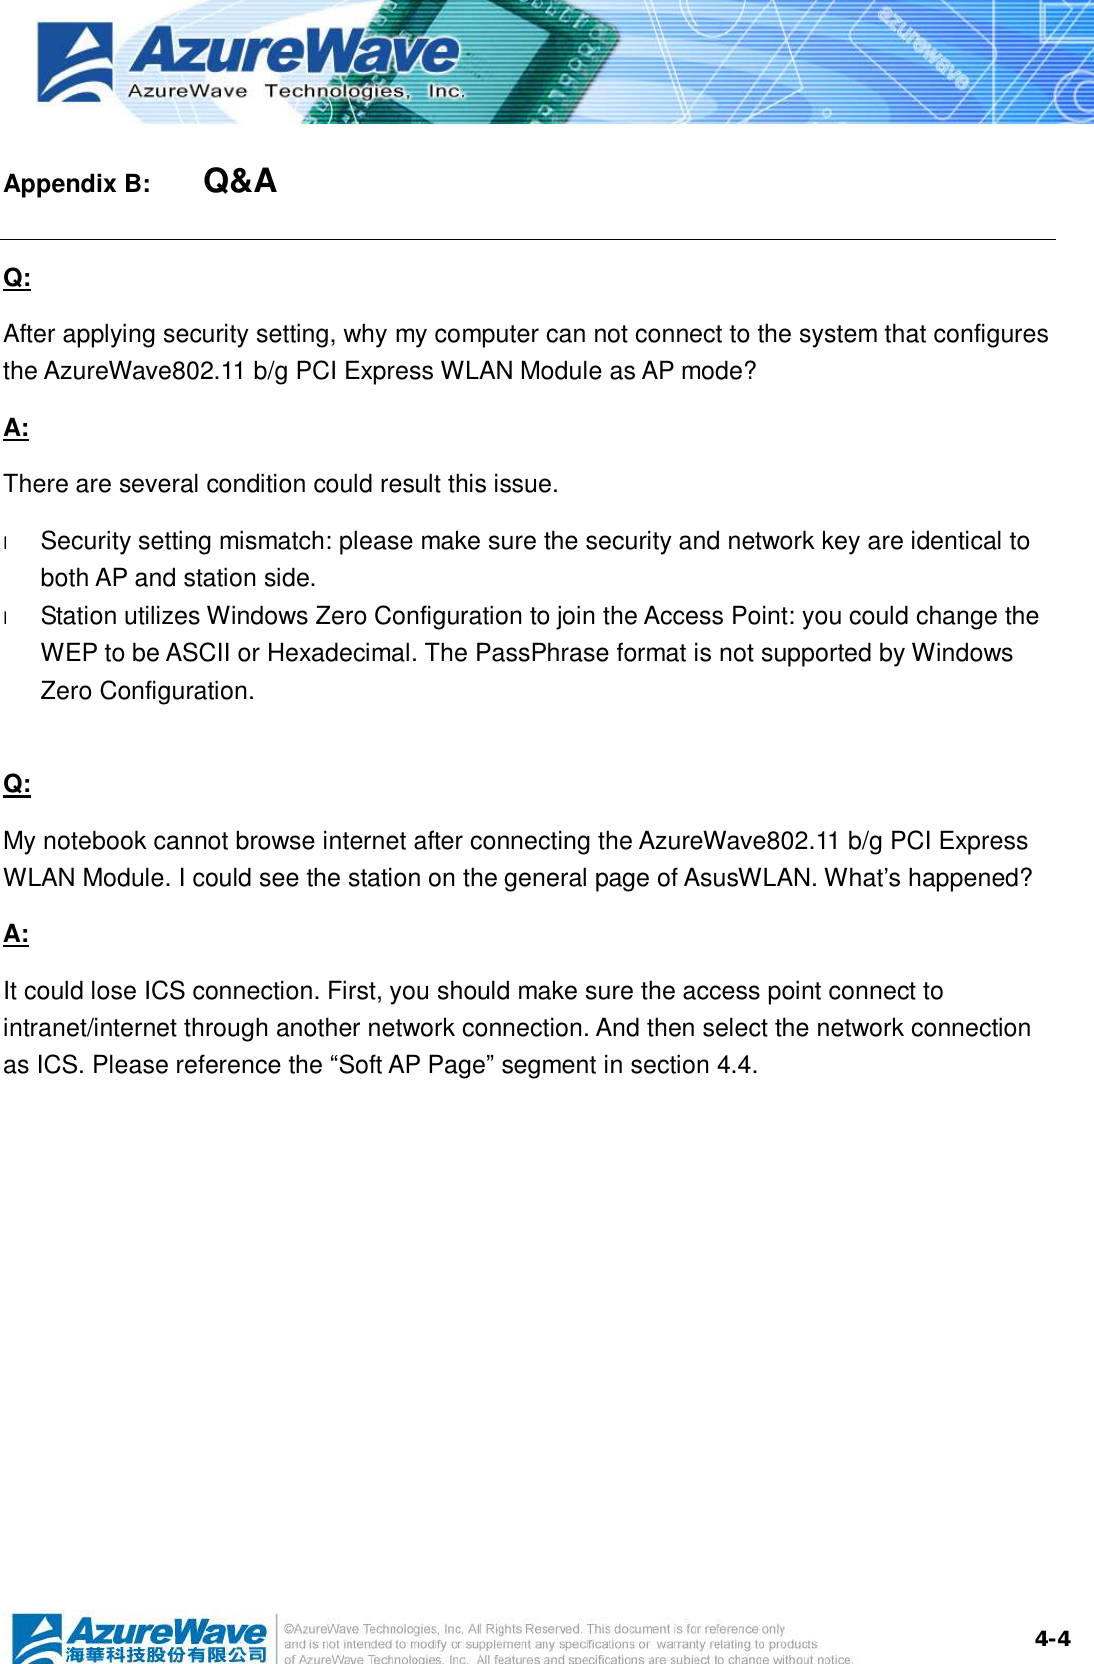  4-4Appendix B:    Q&amp;A Q: After applying security setting, why my computer can not connect to the system that configures the AzureWave802.11 b/g PCI Express WLAN Module as AP mode? A: There are several condition could result this issue. l  Security setting mismatch: please make sure the security and network key are identical to both AP and station side. l  Station utilizes Windows Zero Configuration to join the Access Point: you could change the WEP to be ASCII or Hexadecimal. The PassPhrase format is not supported by Windows Zero Configuration.   Q: My notebook cannot browse internet after connecting the AzureWave802.11 b/g PCI Express WLAN Module. I could see the station on the general page of AsusWLAN. What’s happened? A: It could lose ICS connection. First, you should make sure the access point connect to intranet/internet through another network connection. And then select the network connection as ICS. Please reference the “Soft AP Page” segment in section 4.4.  